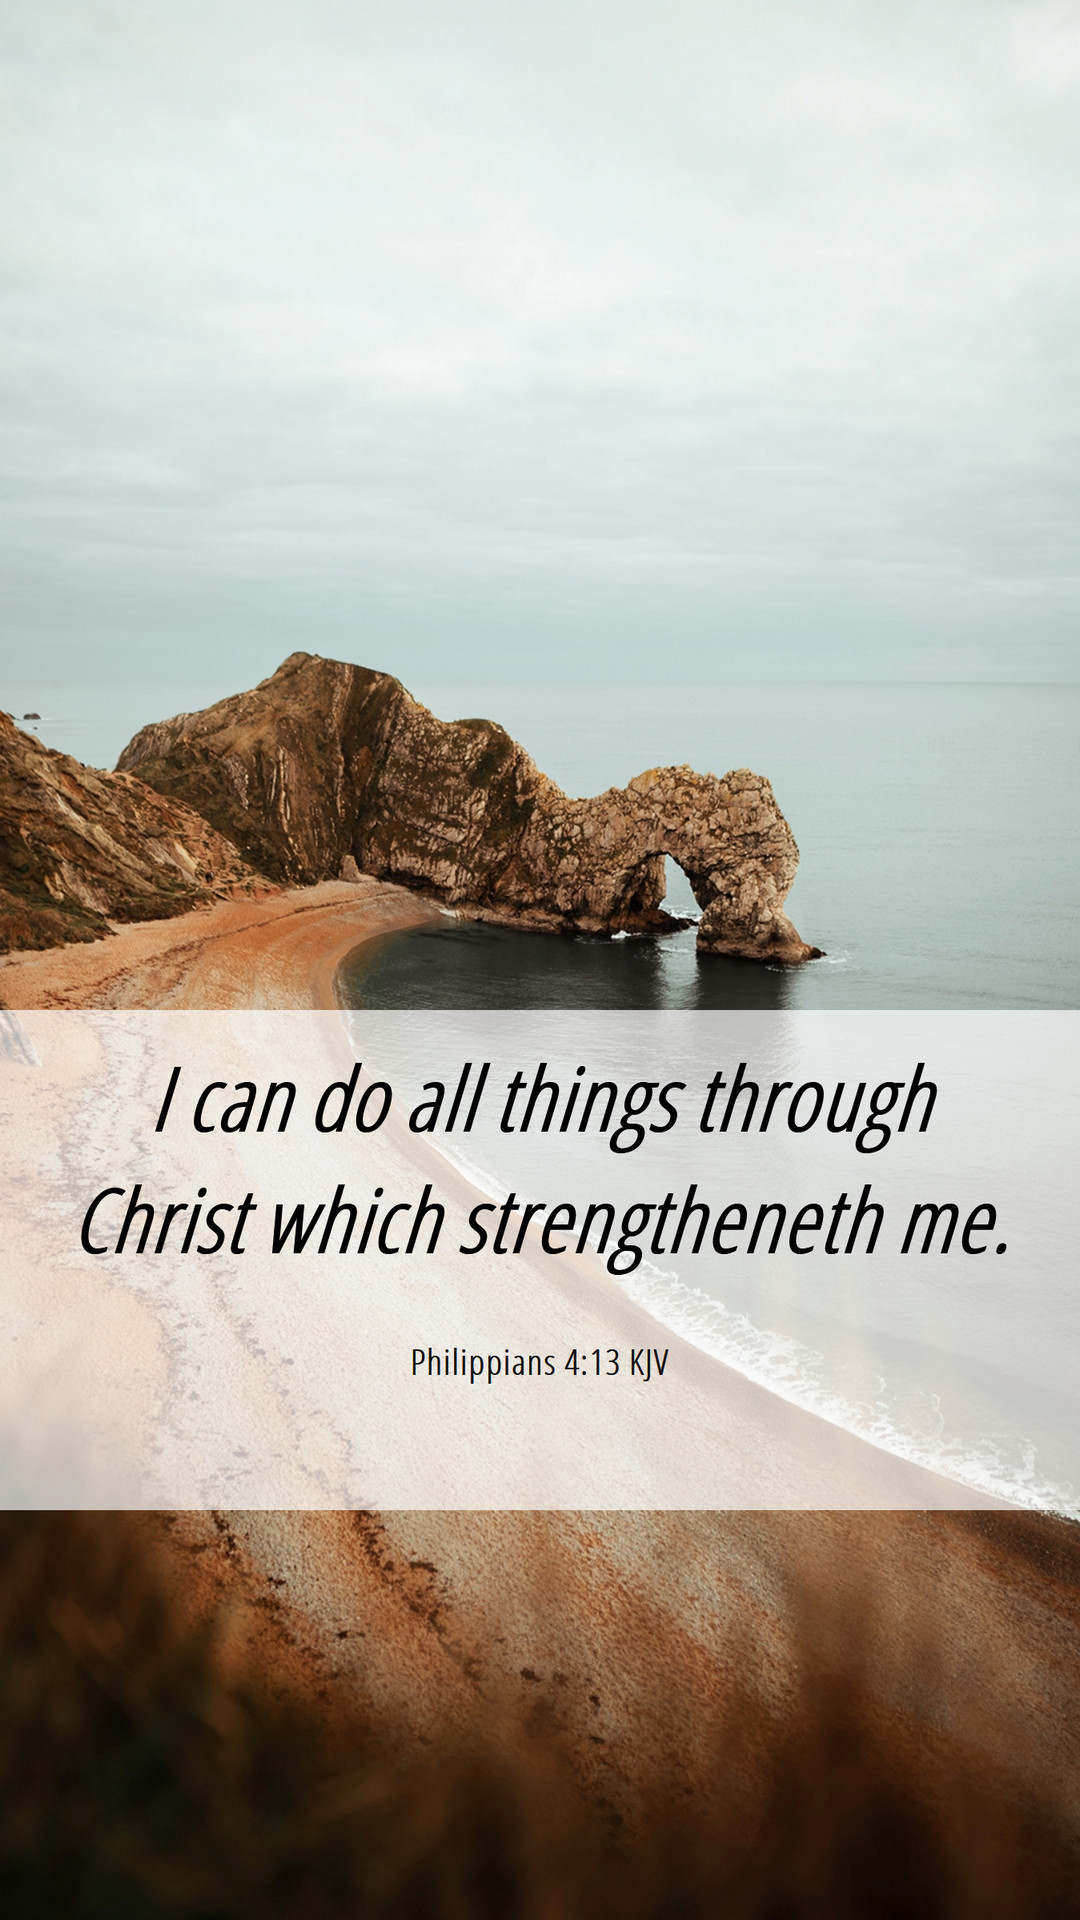 Philippians 4:13 KJV Mobile Phone Wallpaper can do all things through Christ which